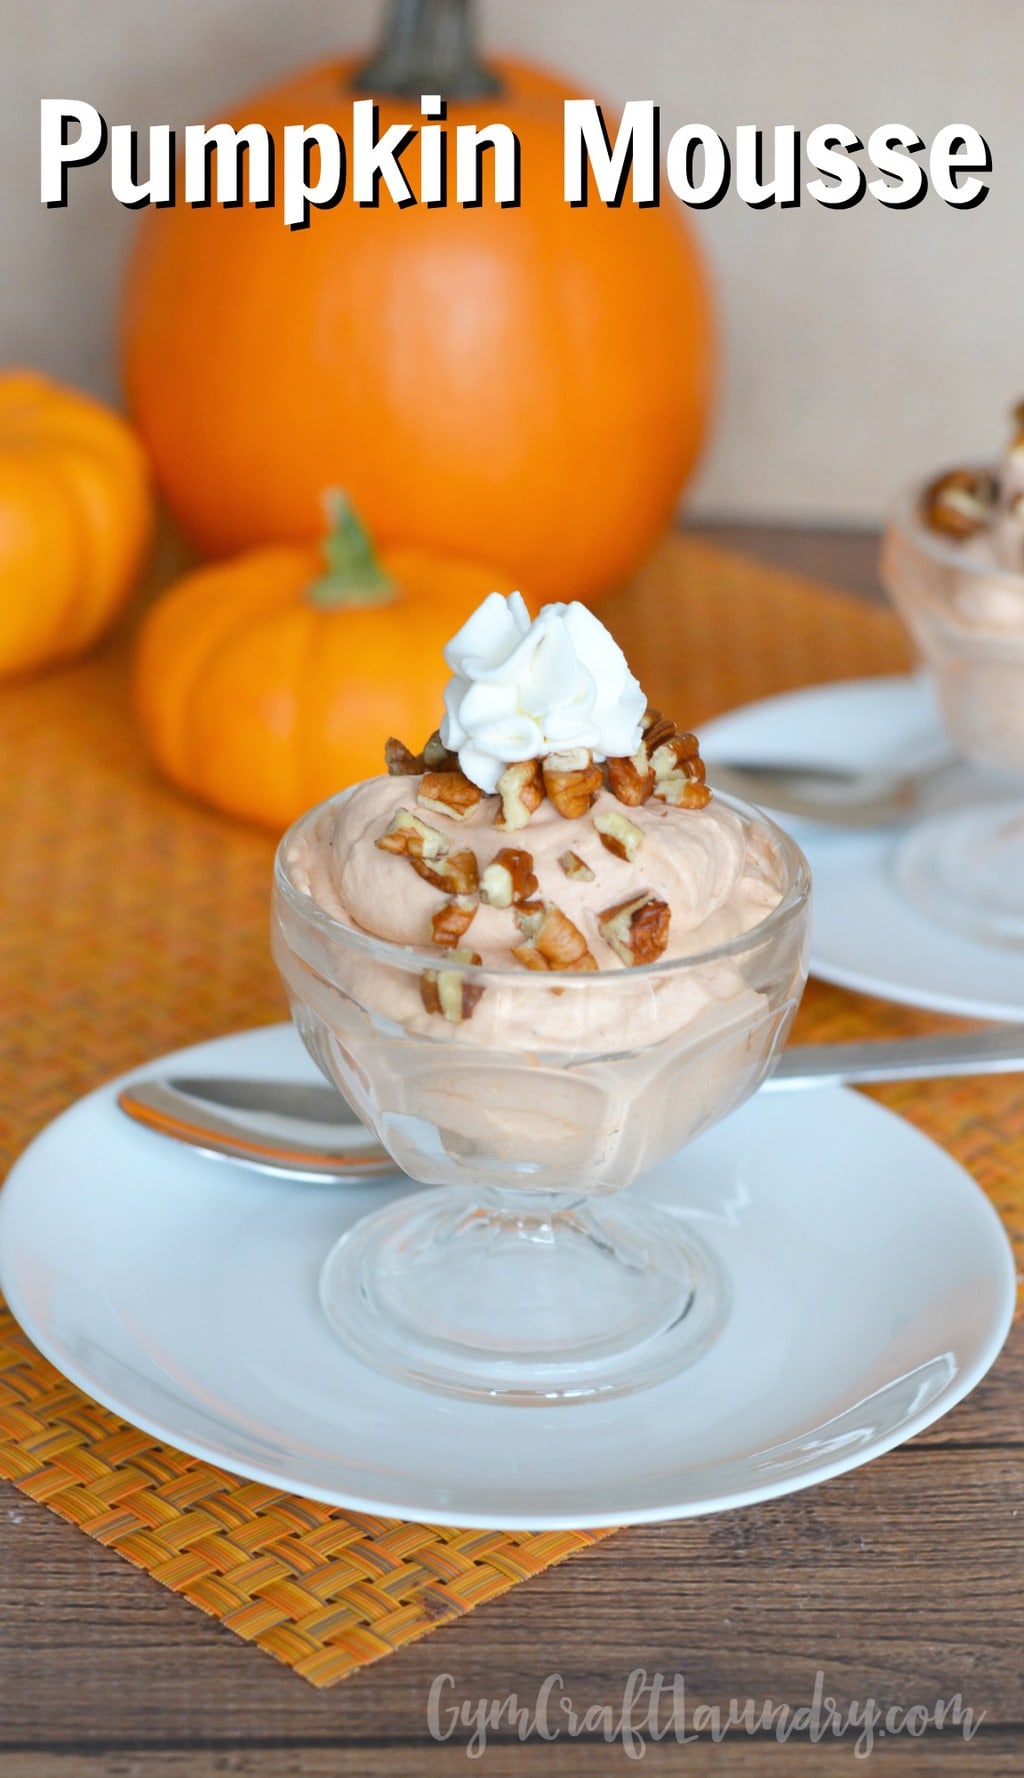 Easy and quick delicious pumpkin mousse recipe